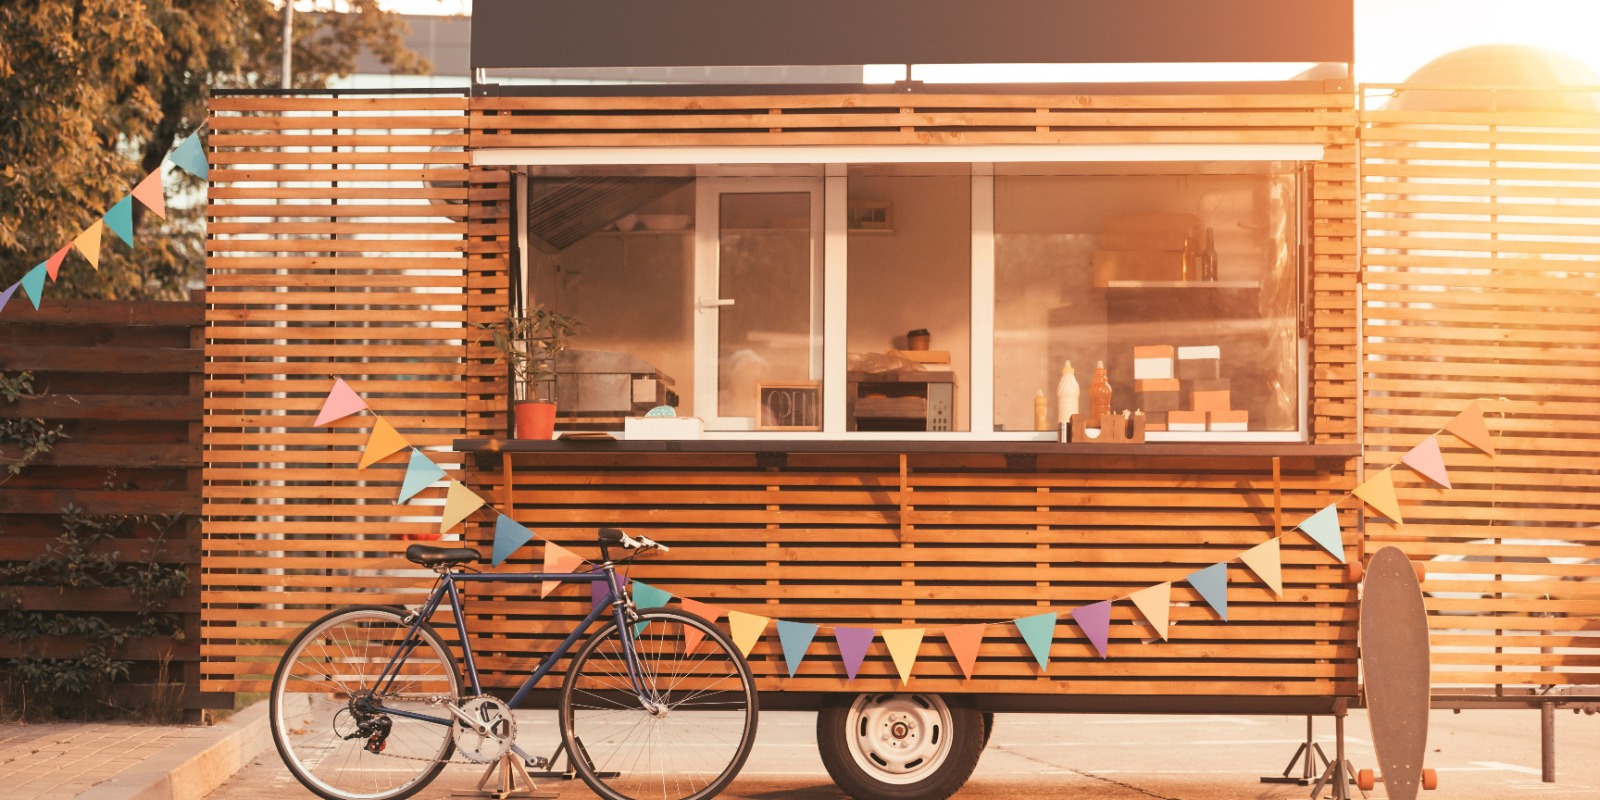 Opening and Operating a Food Truck Business